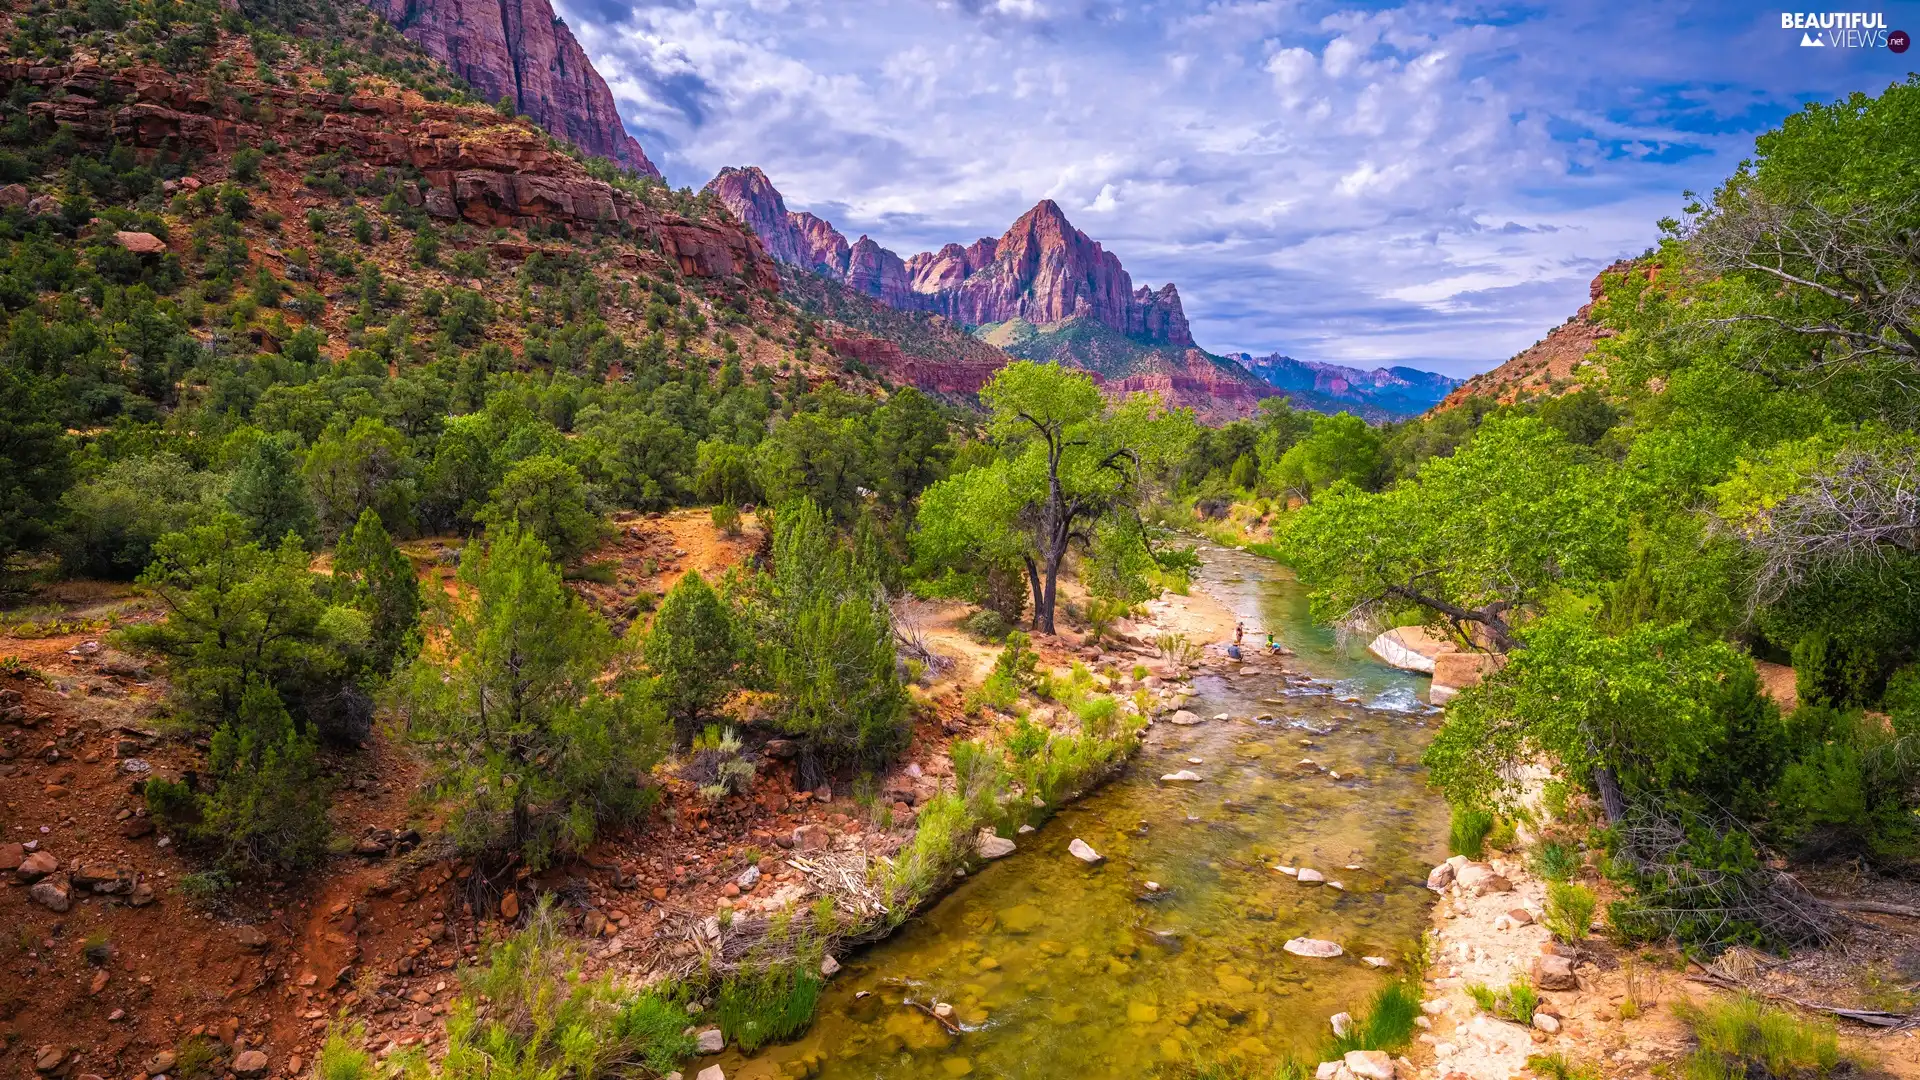 Utah State, The United States, Zion National Park, Watchman Mountains, viewes, clouds, Stones, trees, Virgin River